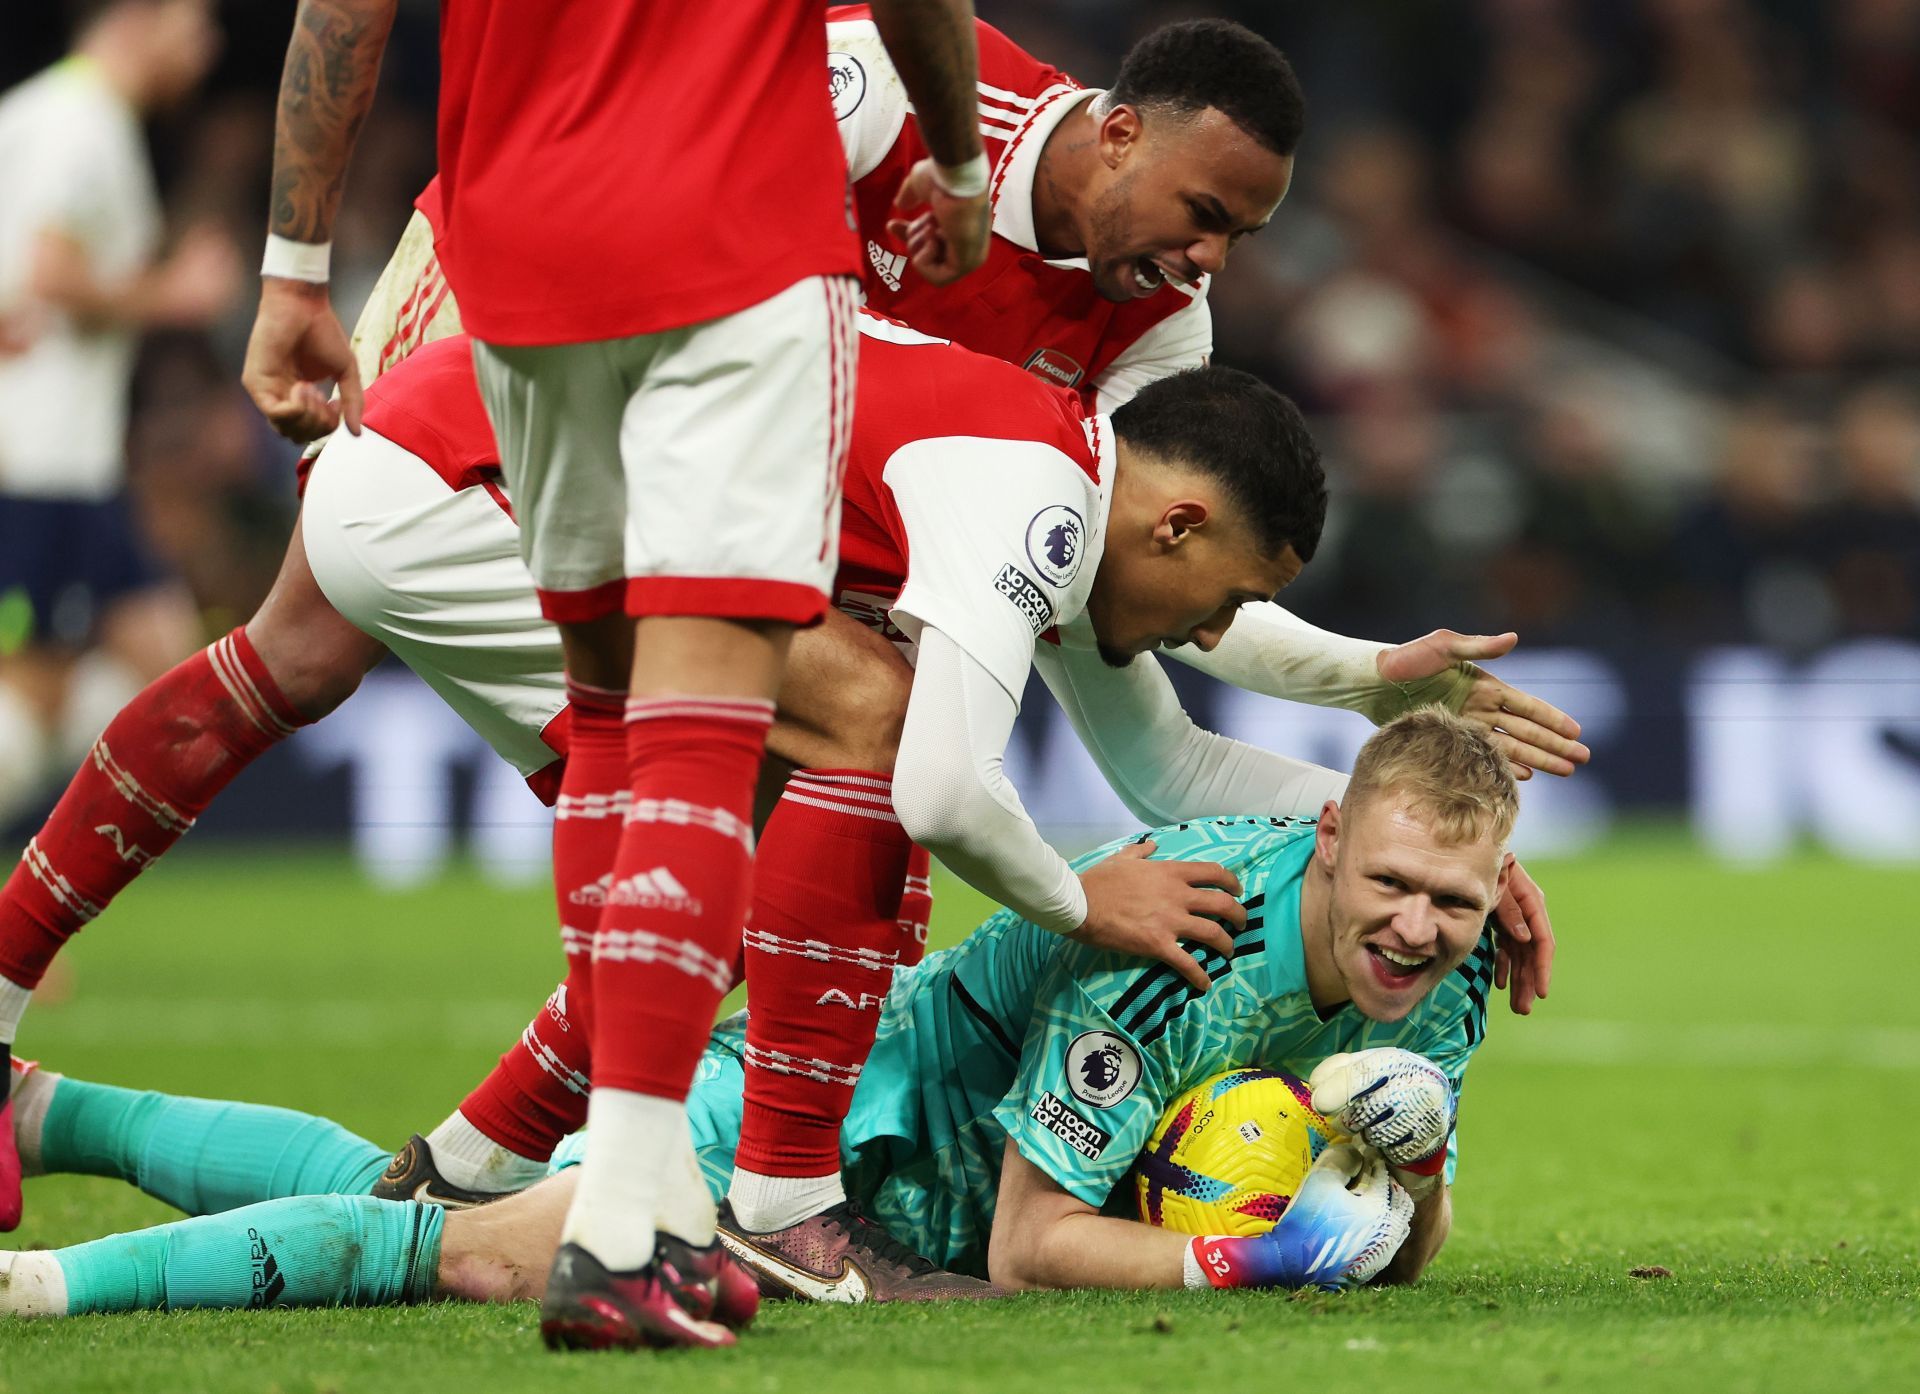 Ramsdale put on a brave display for Arsenal against Tottenham.